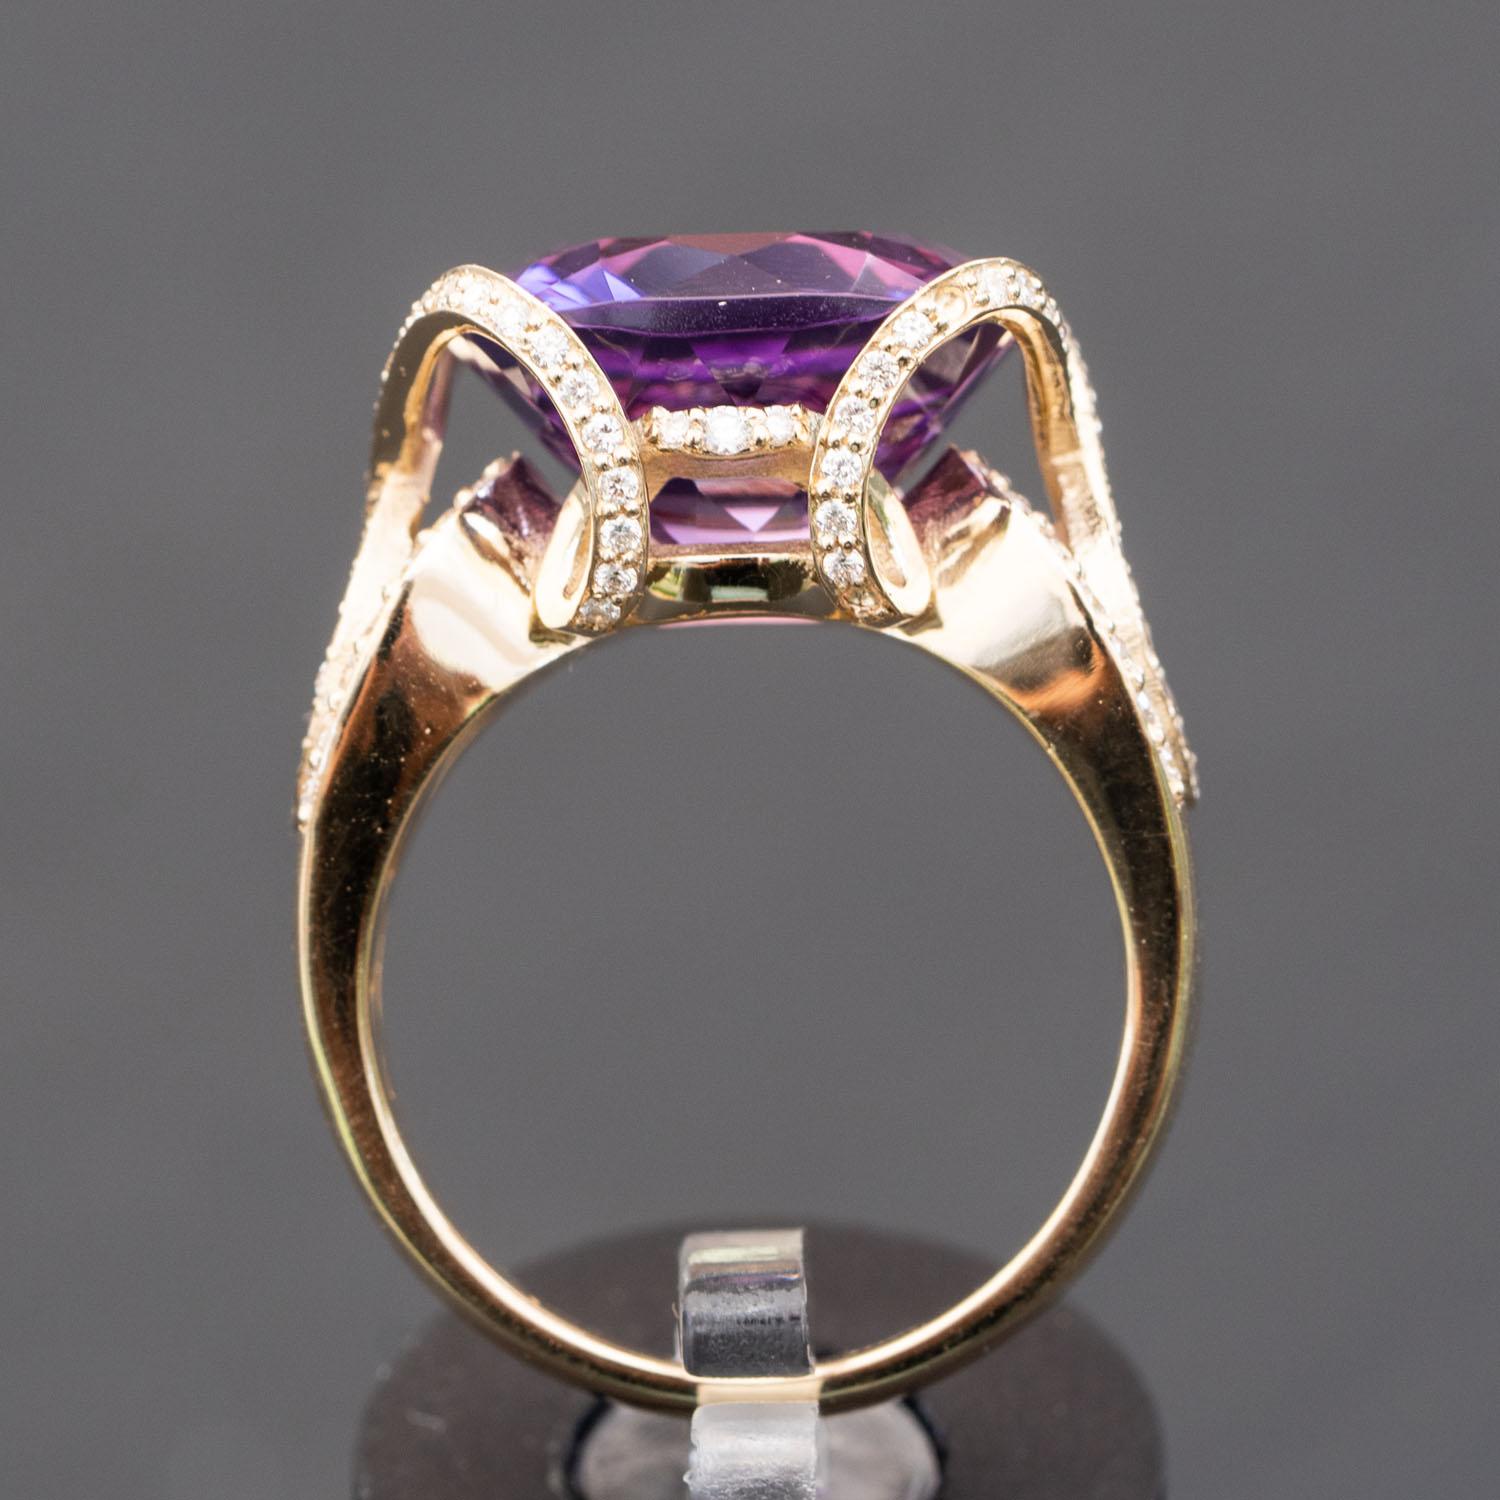 This design features 1.25 carat of VS white untreated natural diamonds, the perfect contrast to the translucent purple of this 12.00 carat natural Amethyst ring. The smooth yellow gold band offers a beautifully balanced texture to this natural